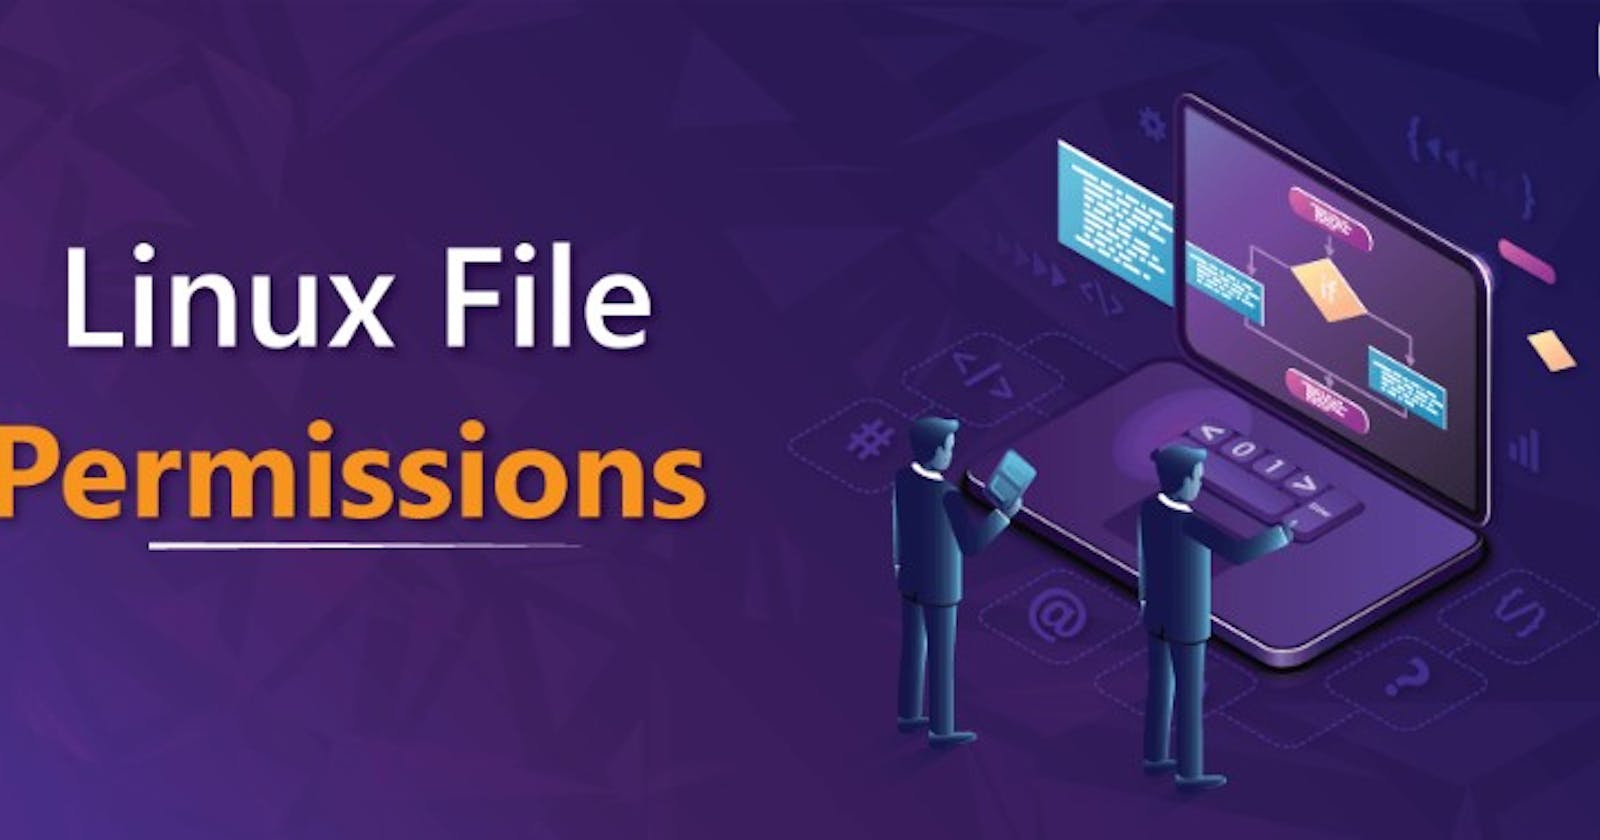 Day6- Linux File Permissions and Access Control Lists